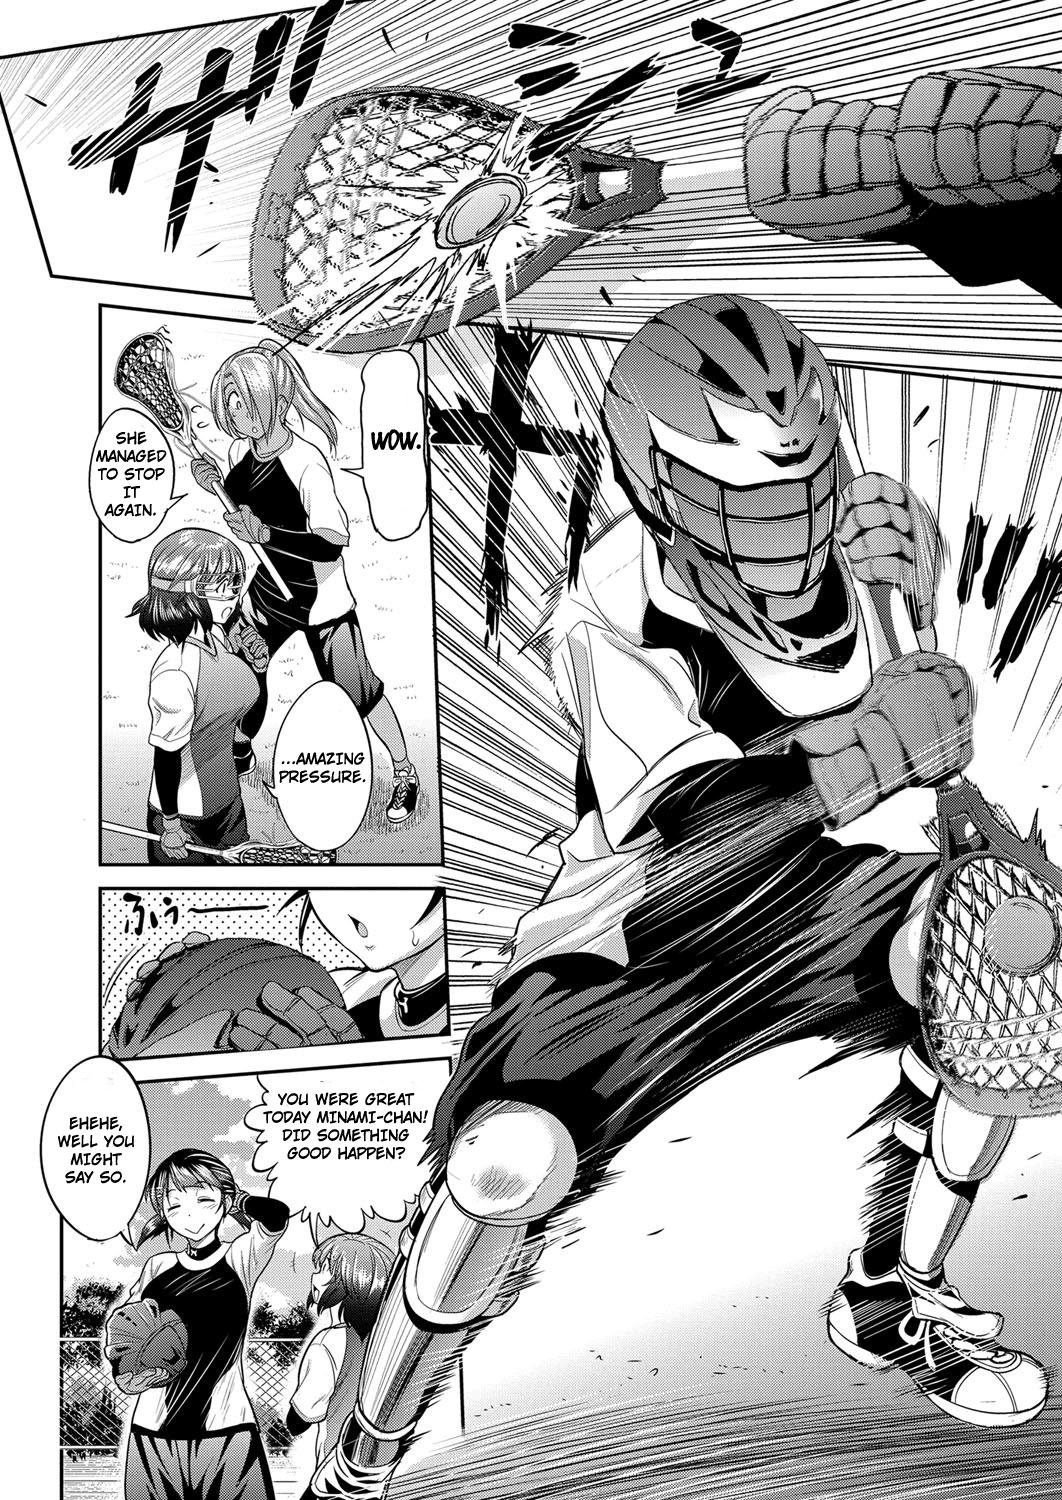 [DISTANCE] Joshi Lacu! - Girls Lacrosse Club ~2 Years Later~ Ch. 2 (COMIC ExE 03) [English] [TripleSevenScans] [Digital] 35